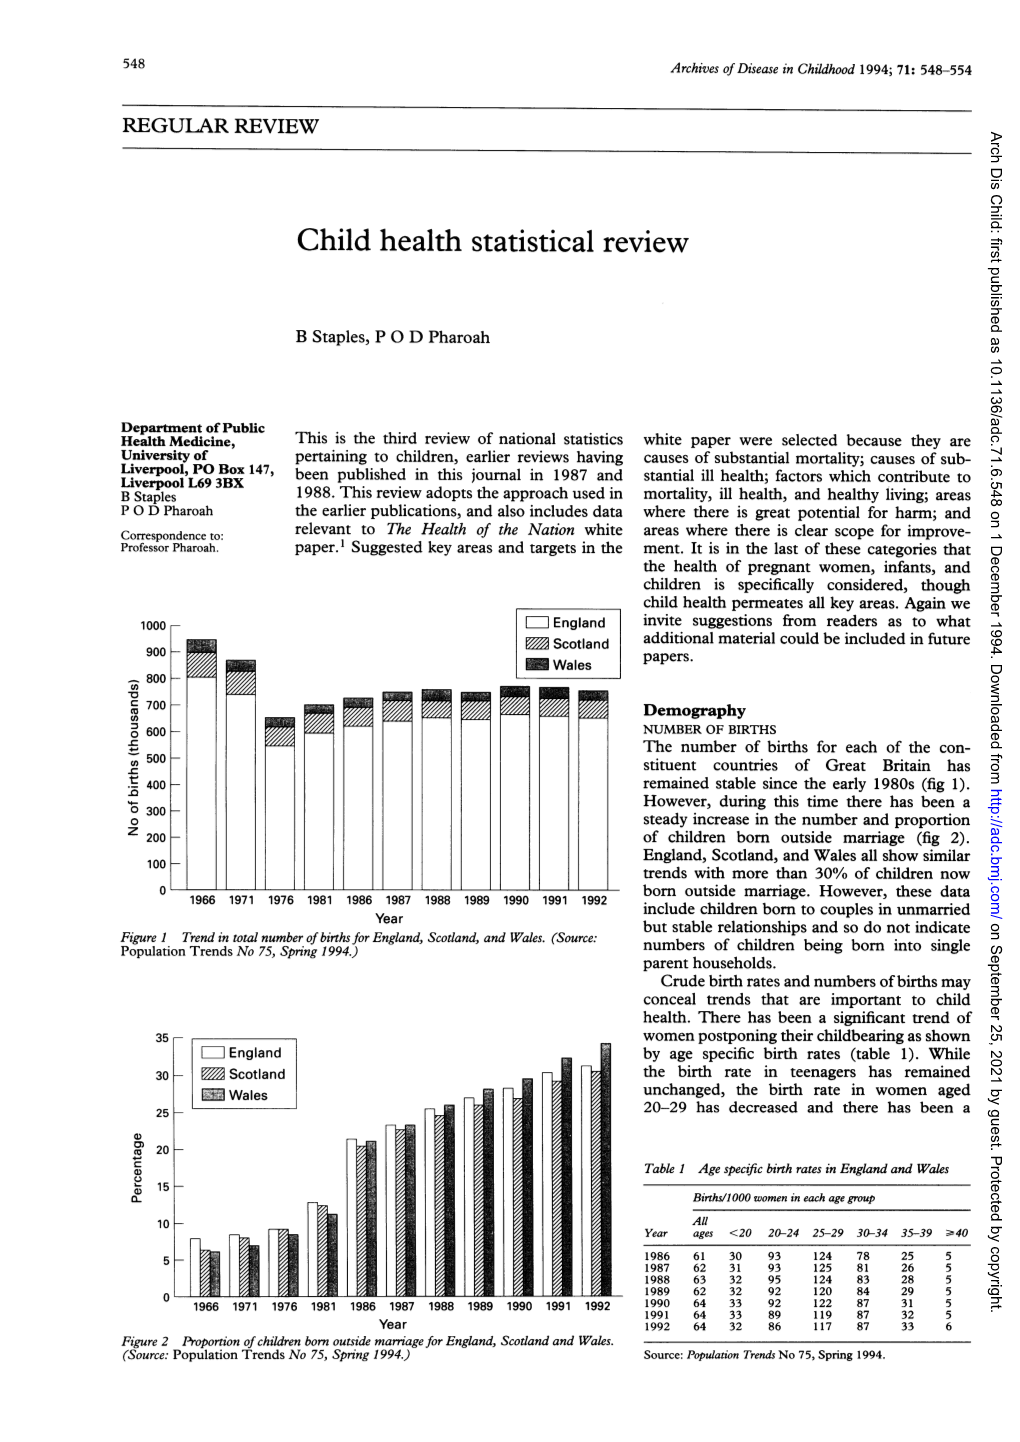 Child Health Statistical Review